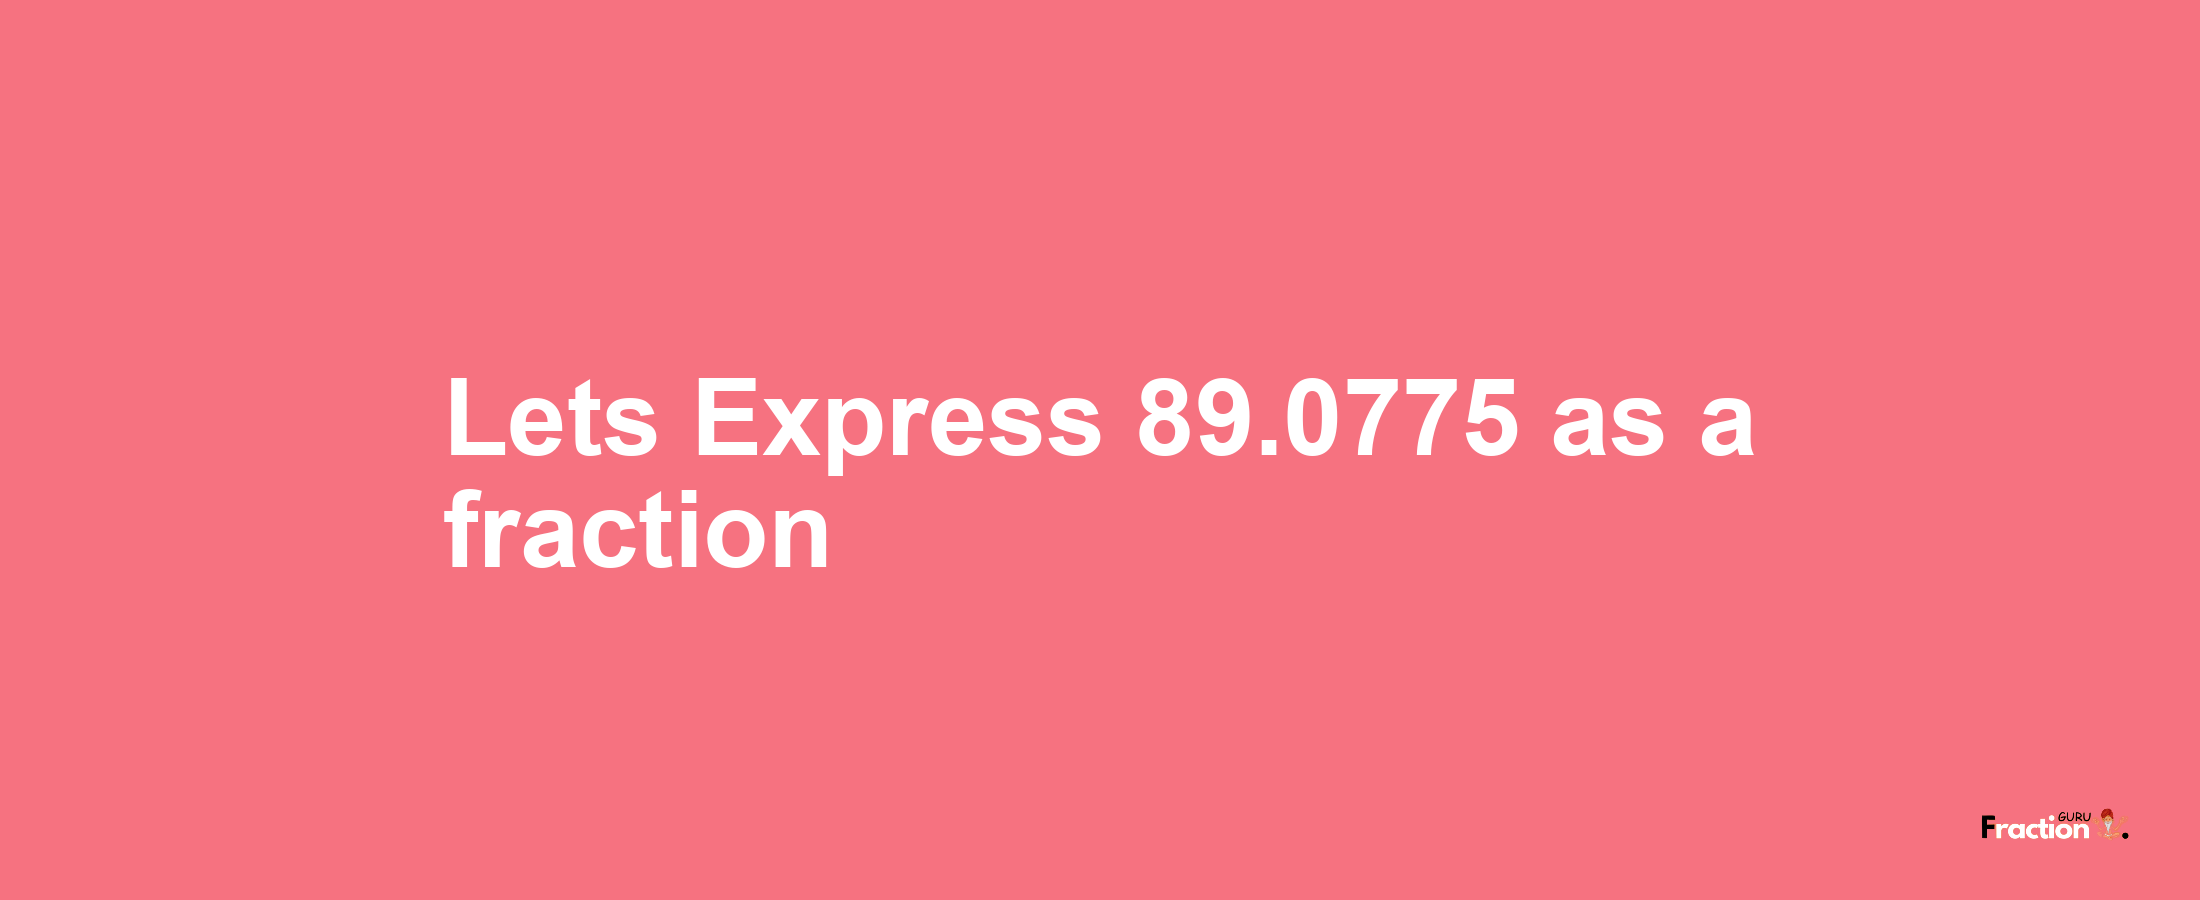 Lets Express 89.0775 as afraction